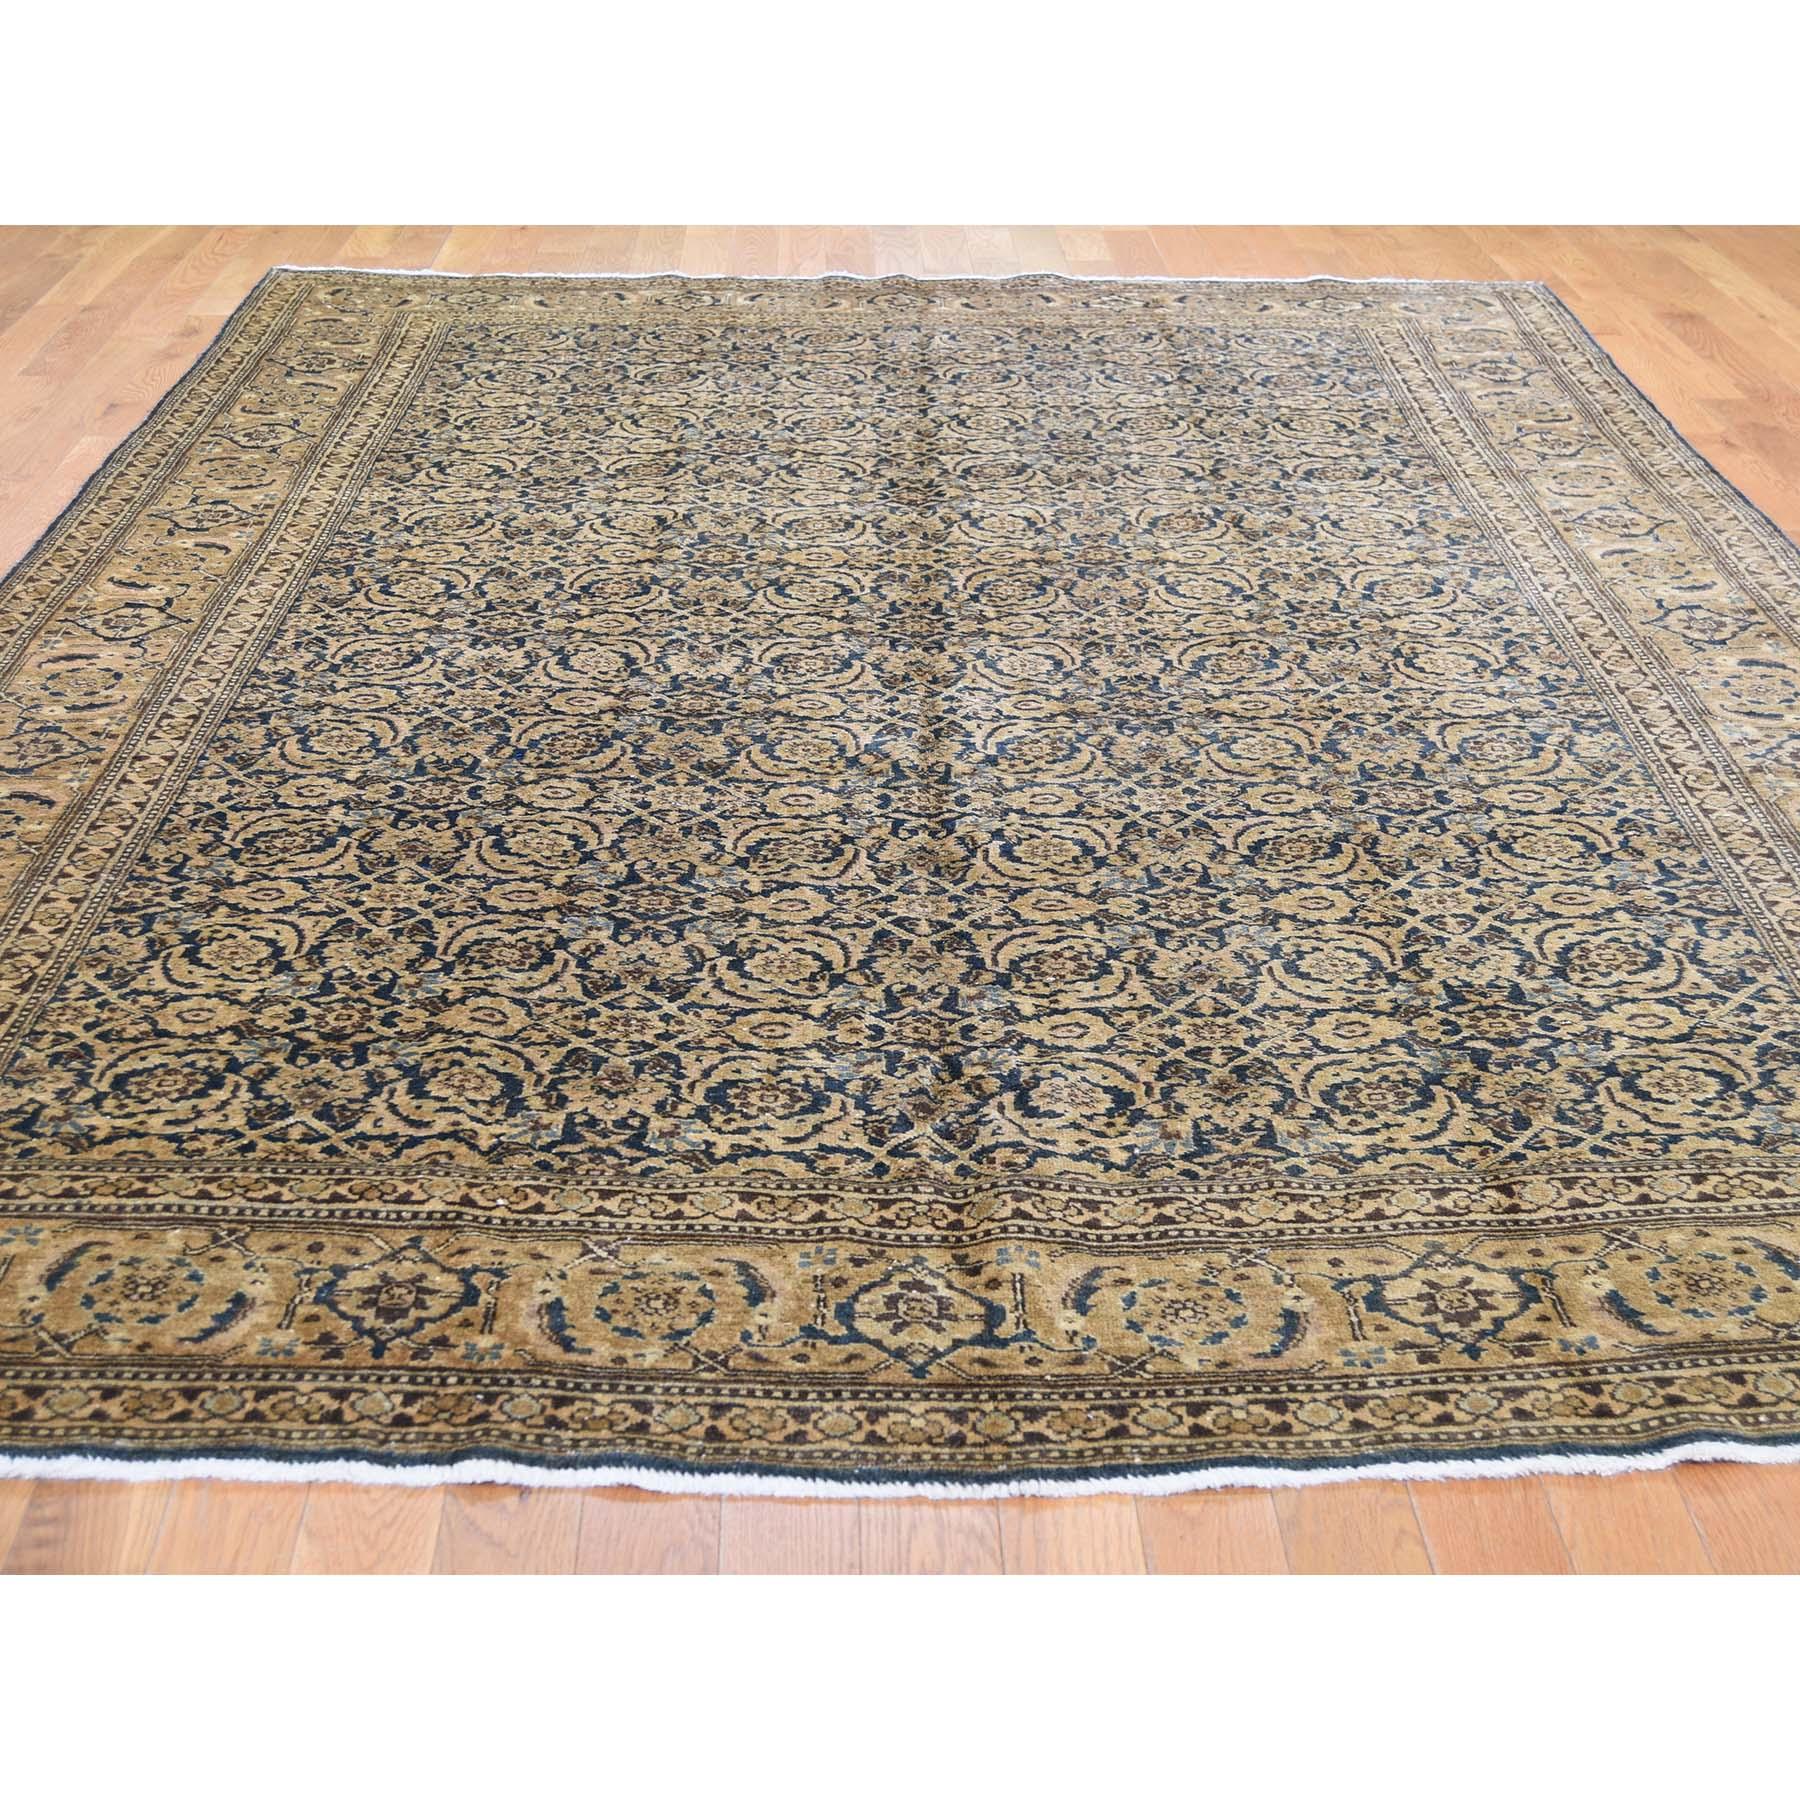 Hand-Knotted Antique Persian Tabriz Full Pile Excellent Condition Hand Knotted Oriental Rug